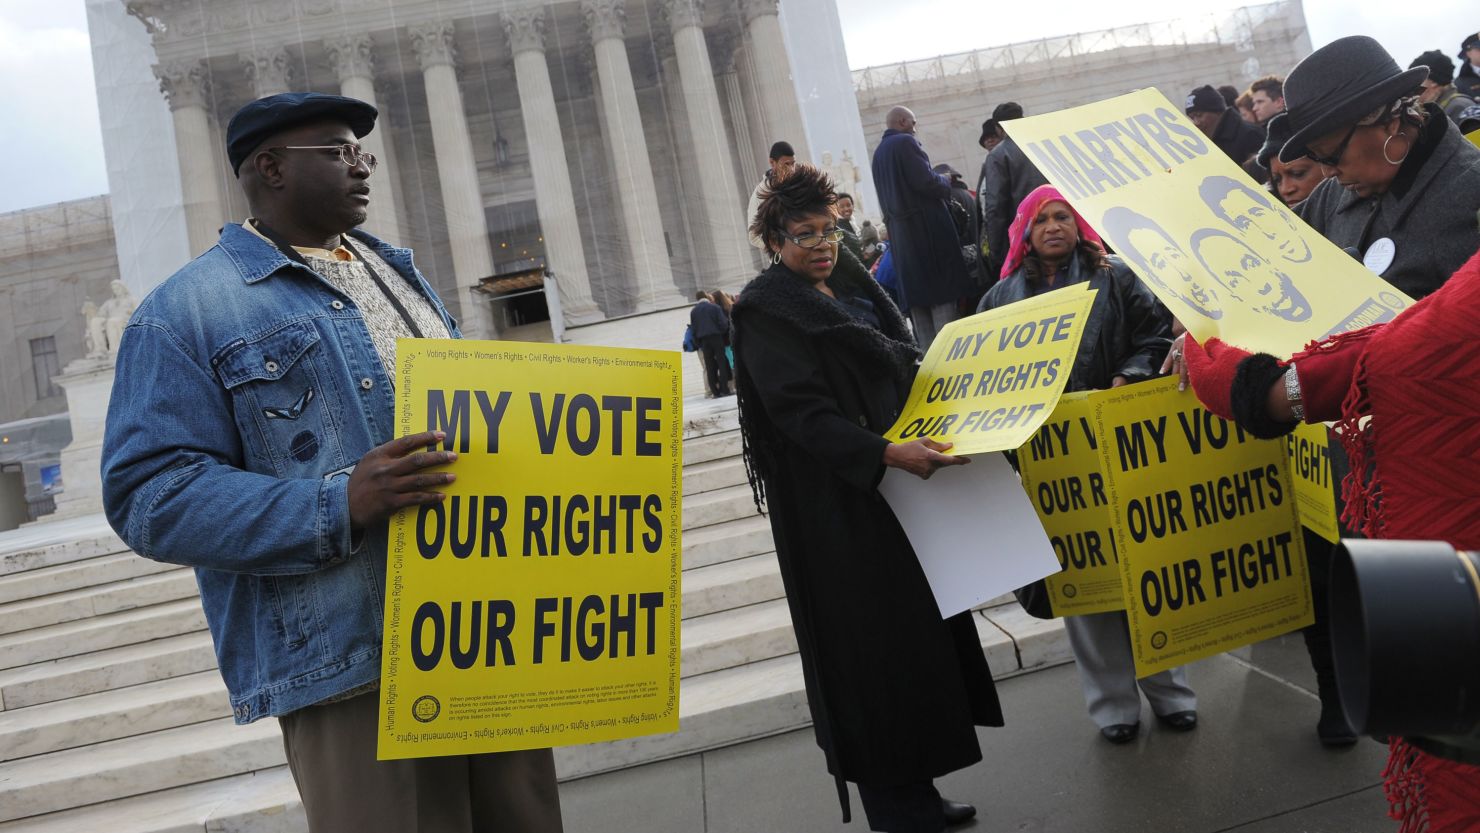 Voting rights. Right to vote